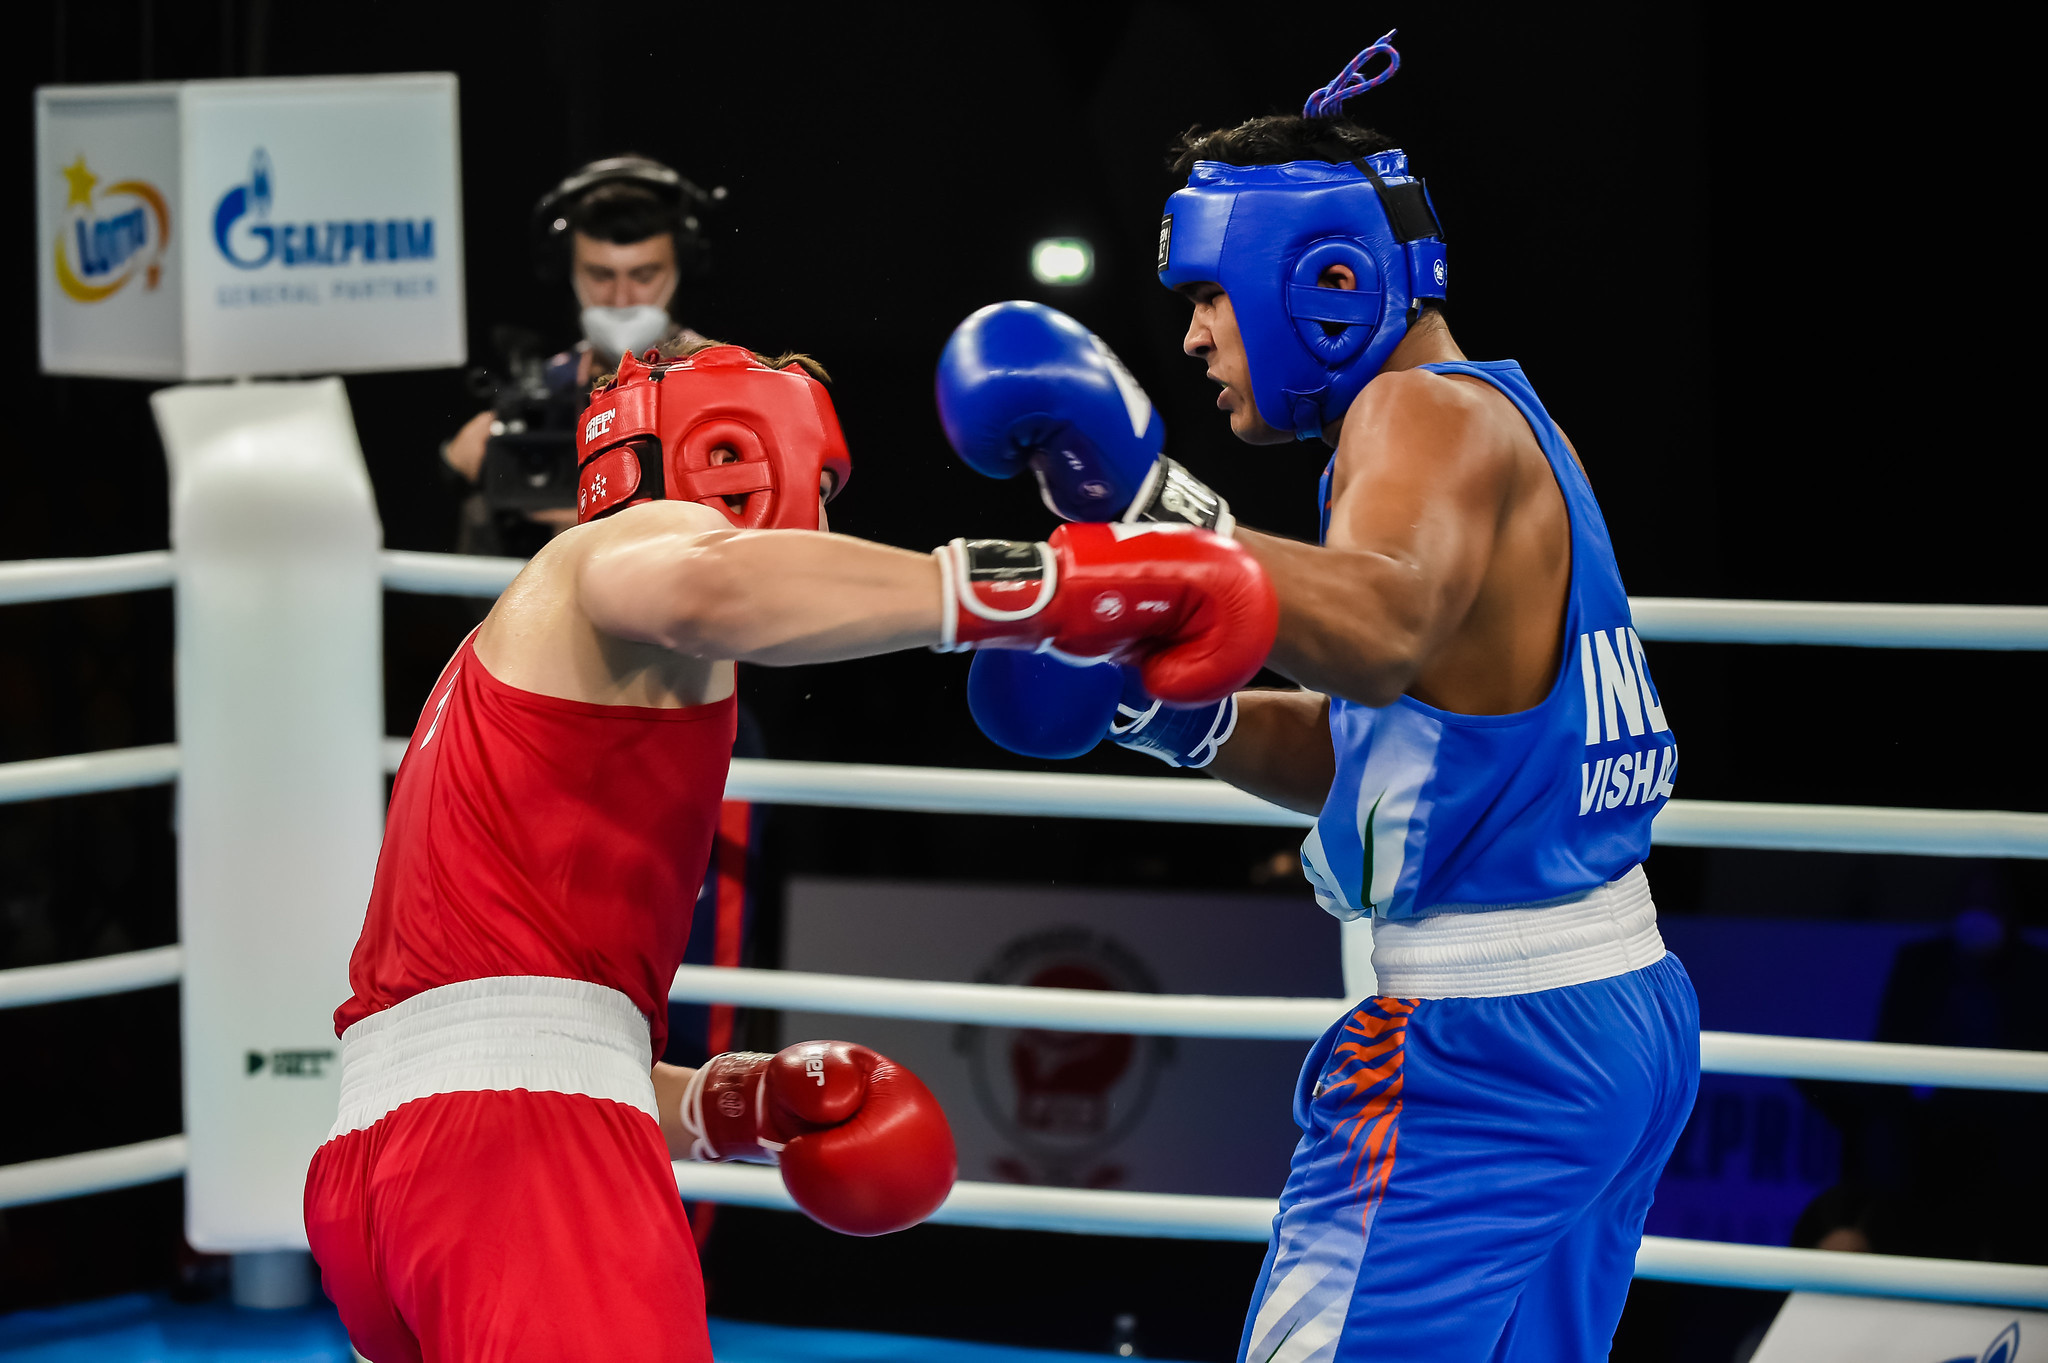 Vishal Gupta, in blue, was one of them in the men's 91kg heavyweight division, beating Kazakhstan’s Madi Amirov ©AIBA